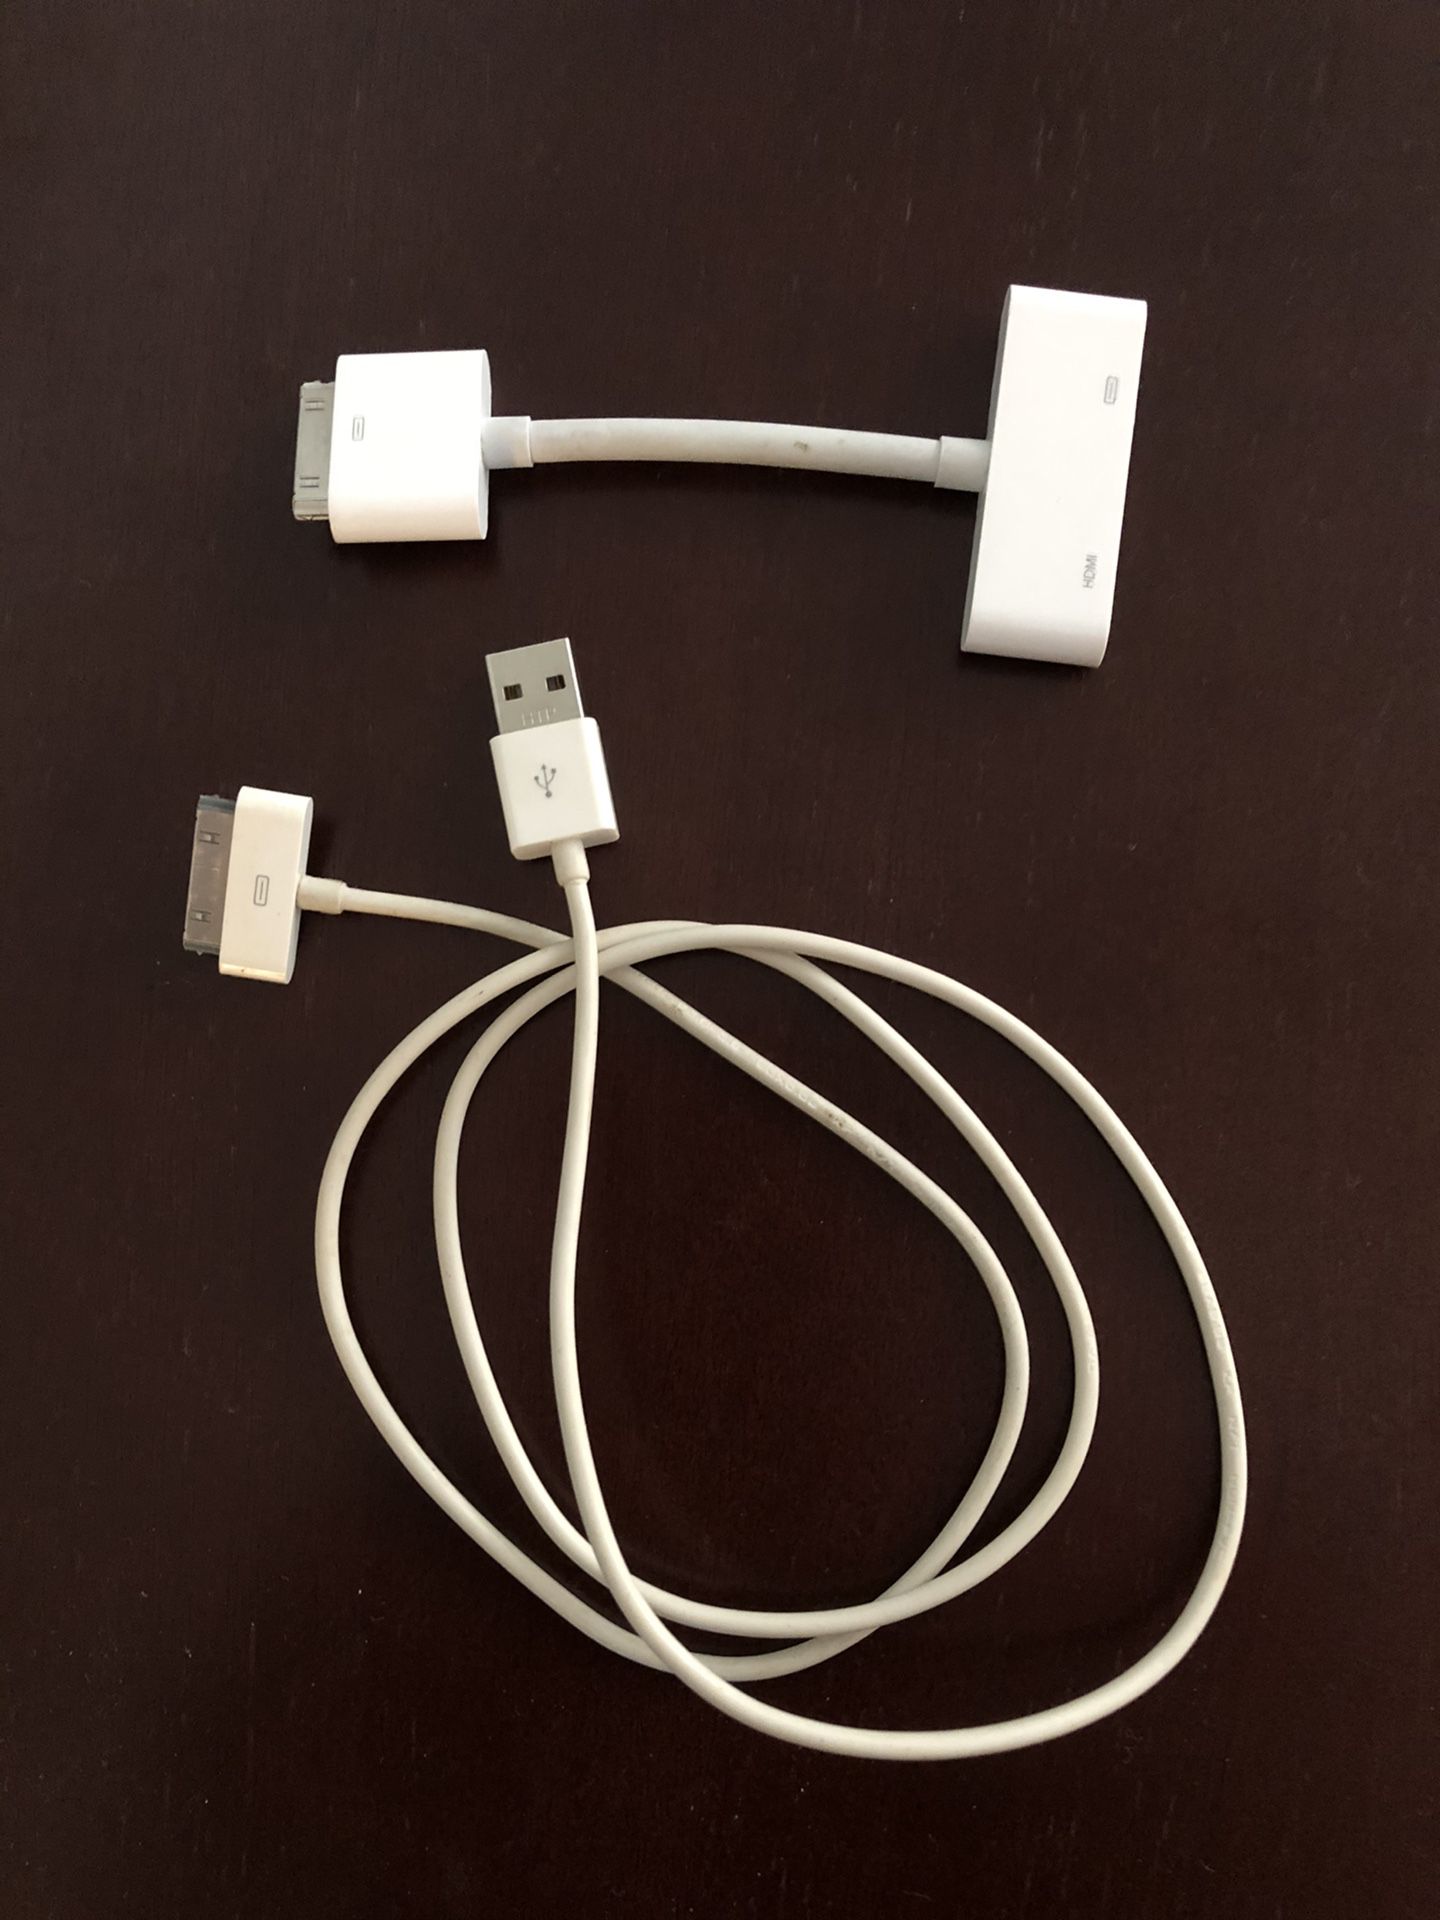 Apple 30 pin HDMI adapter w/ charge cable